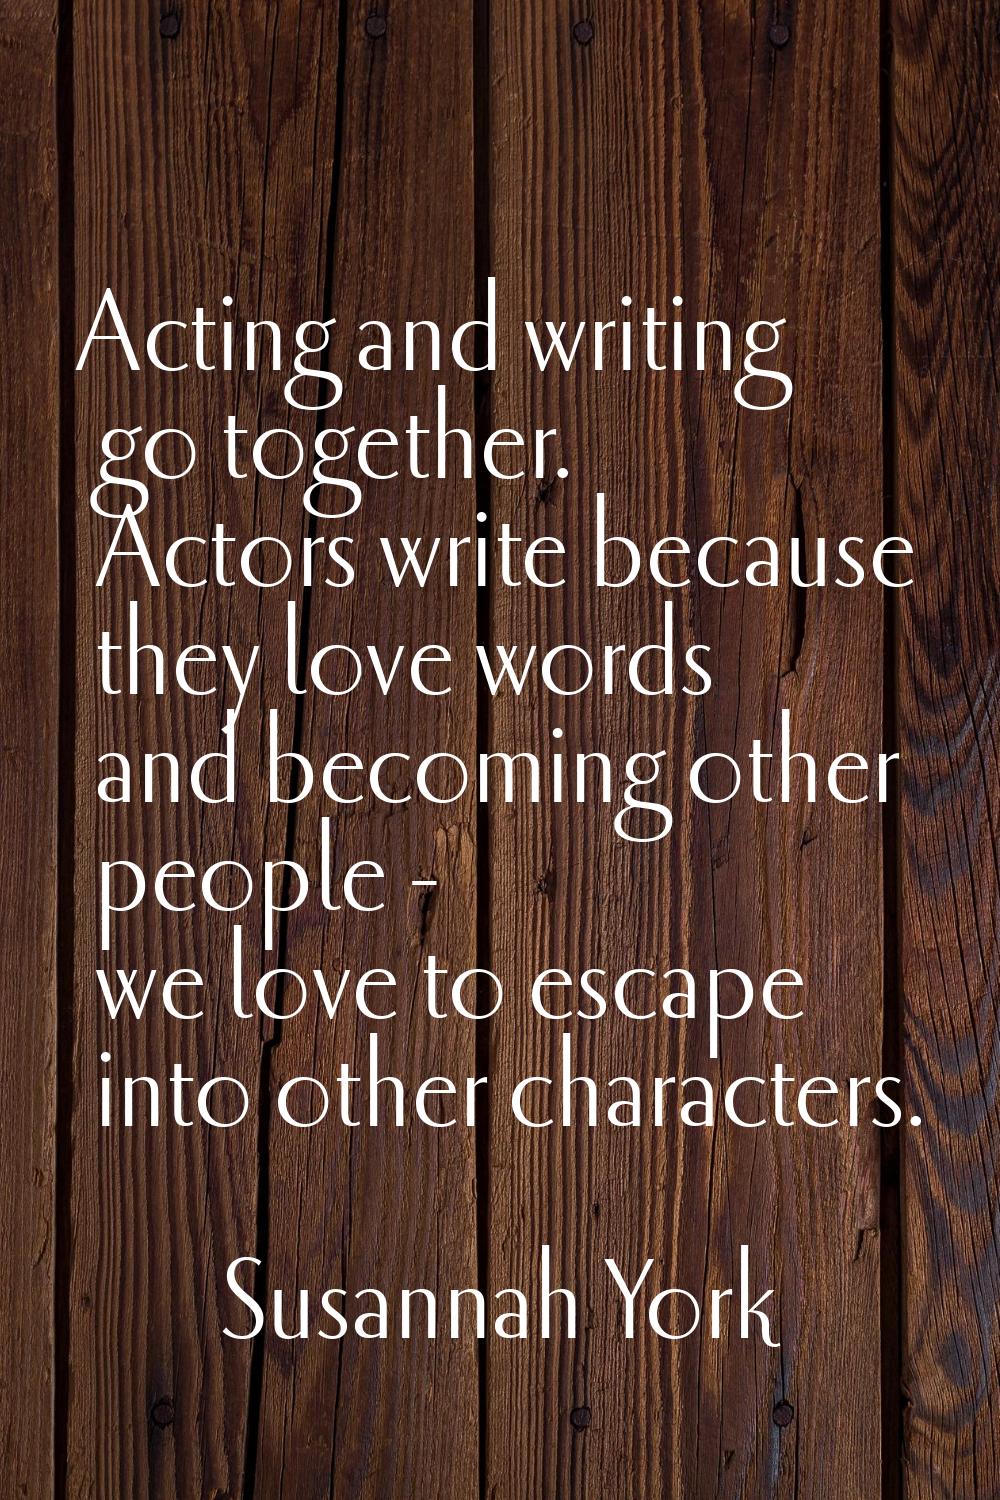 Acting and writing go together. Actors write because they love words and becoming other people - we